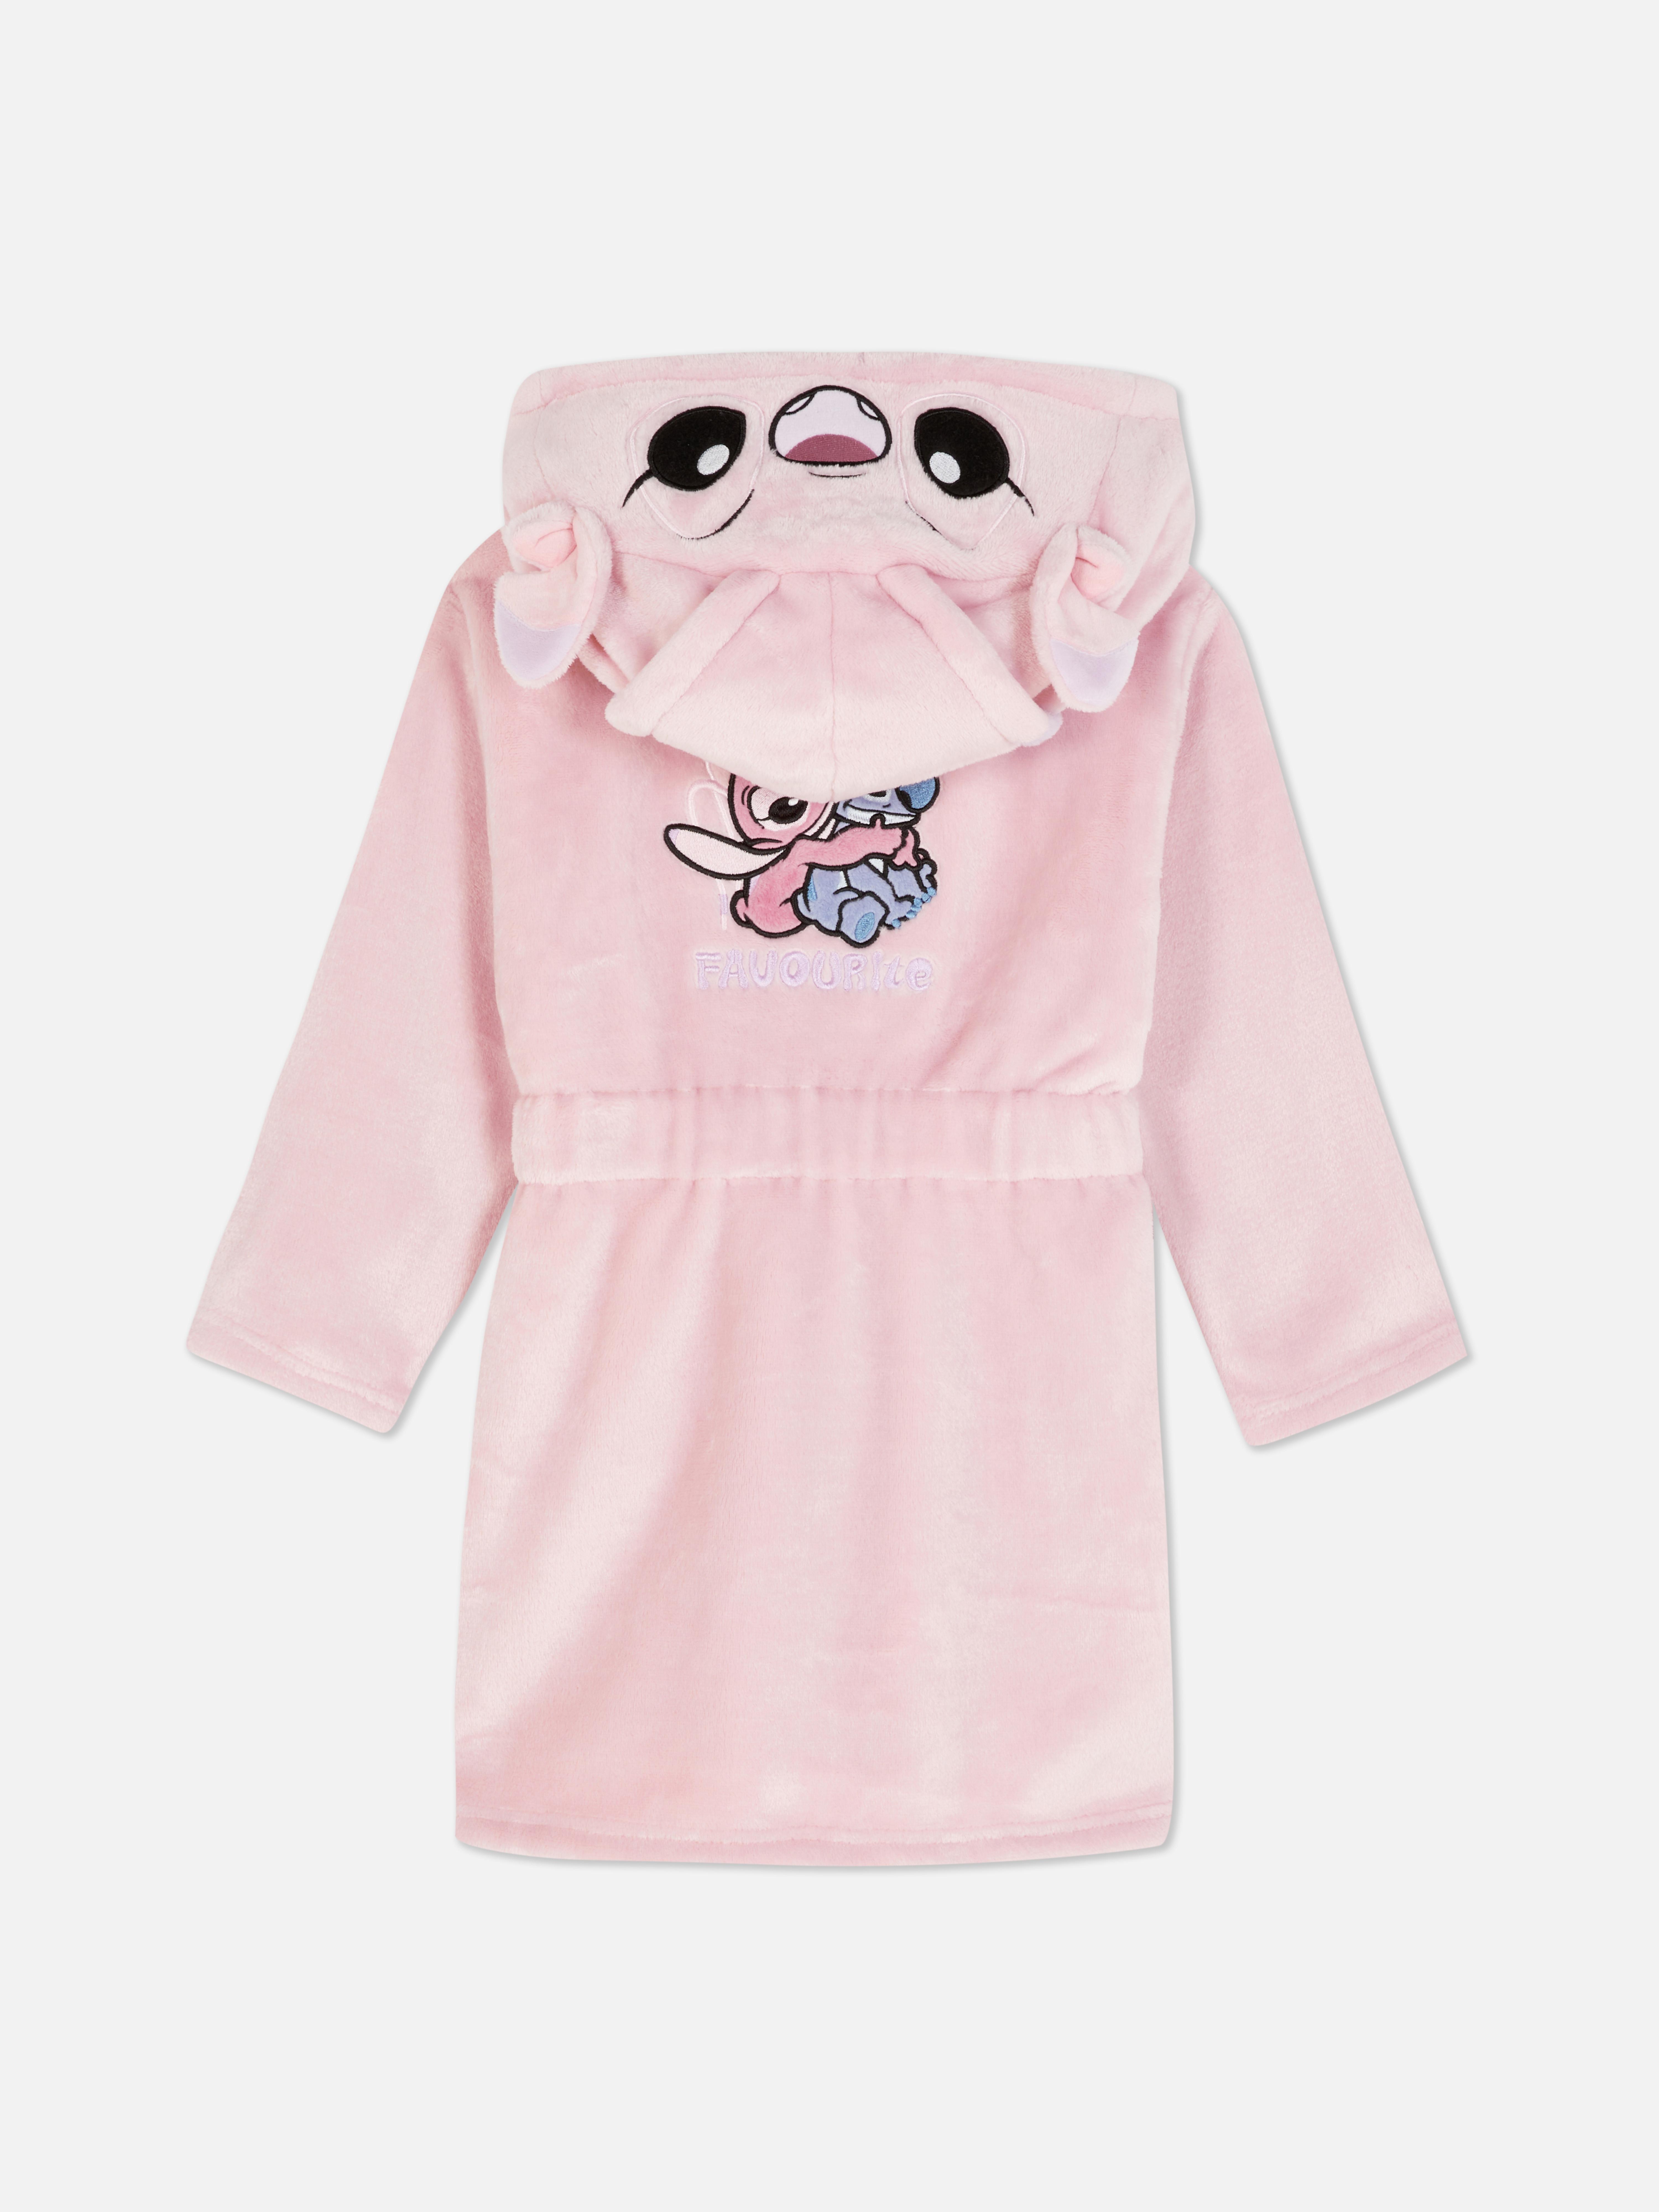 Disney Lilo and Stitch Kids Sizes Dressing Gown, Robe for Girls